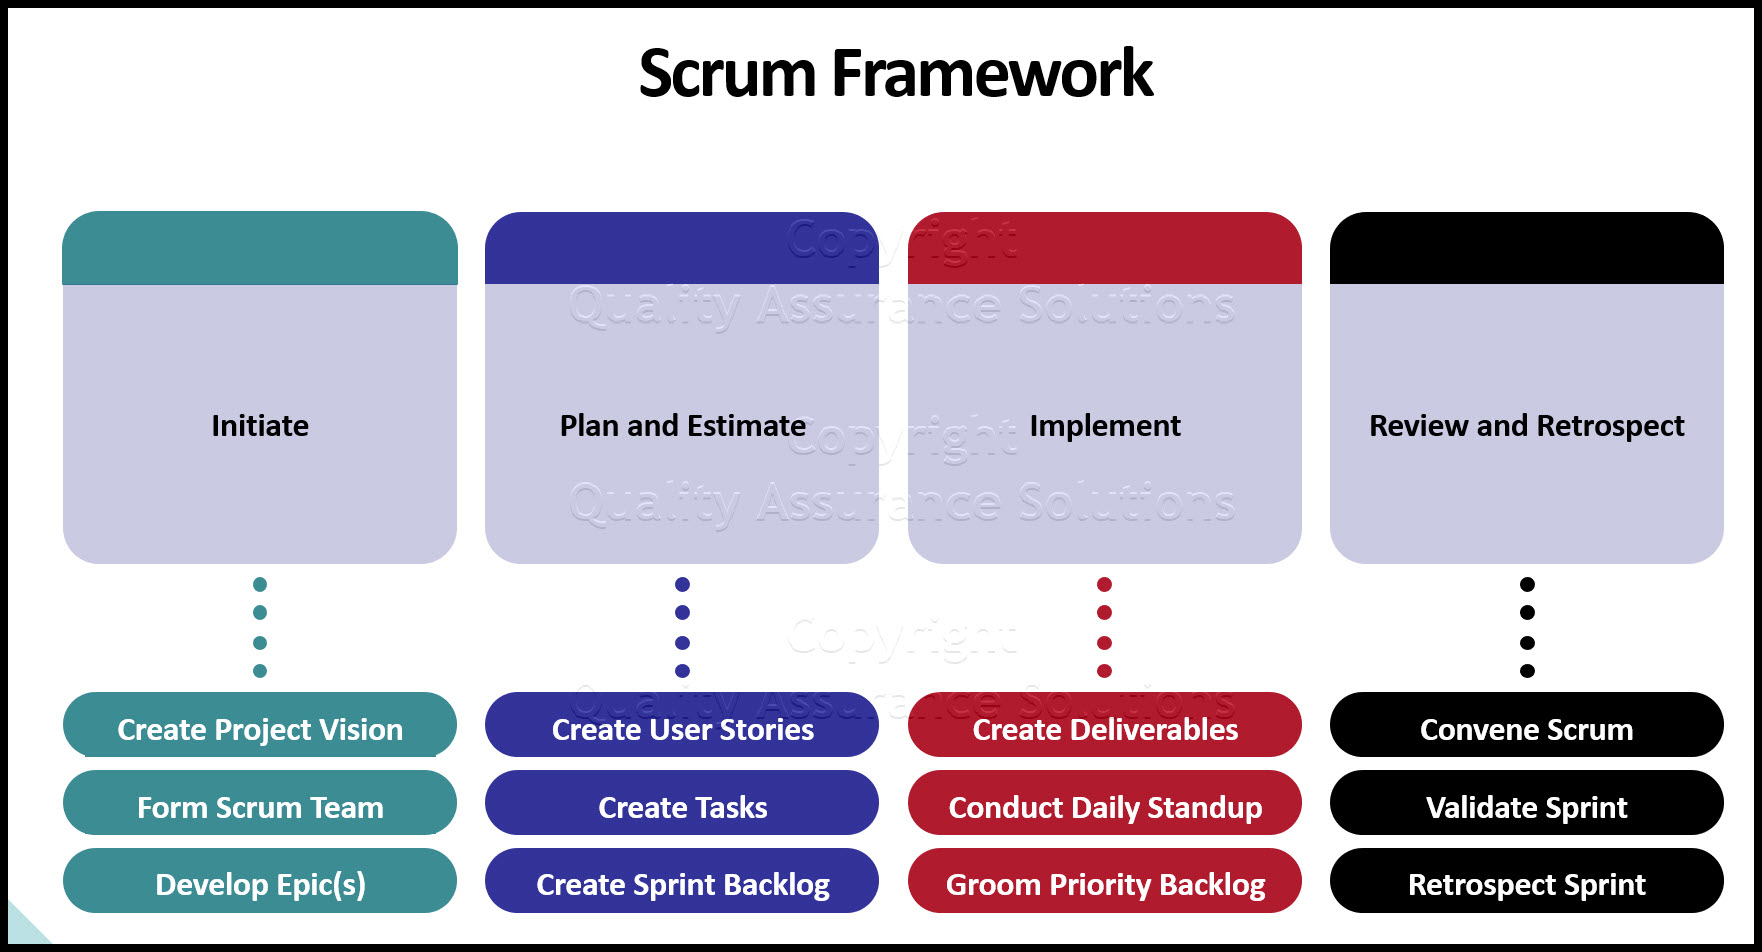 Review the Scrum processes including planning, estimating, review, retrospect and release